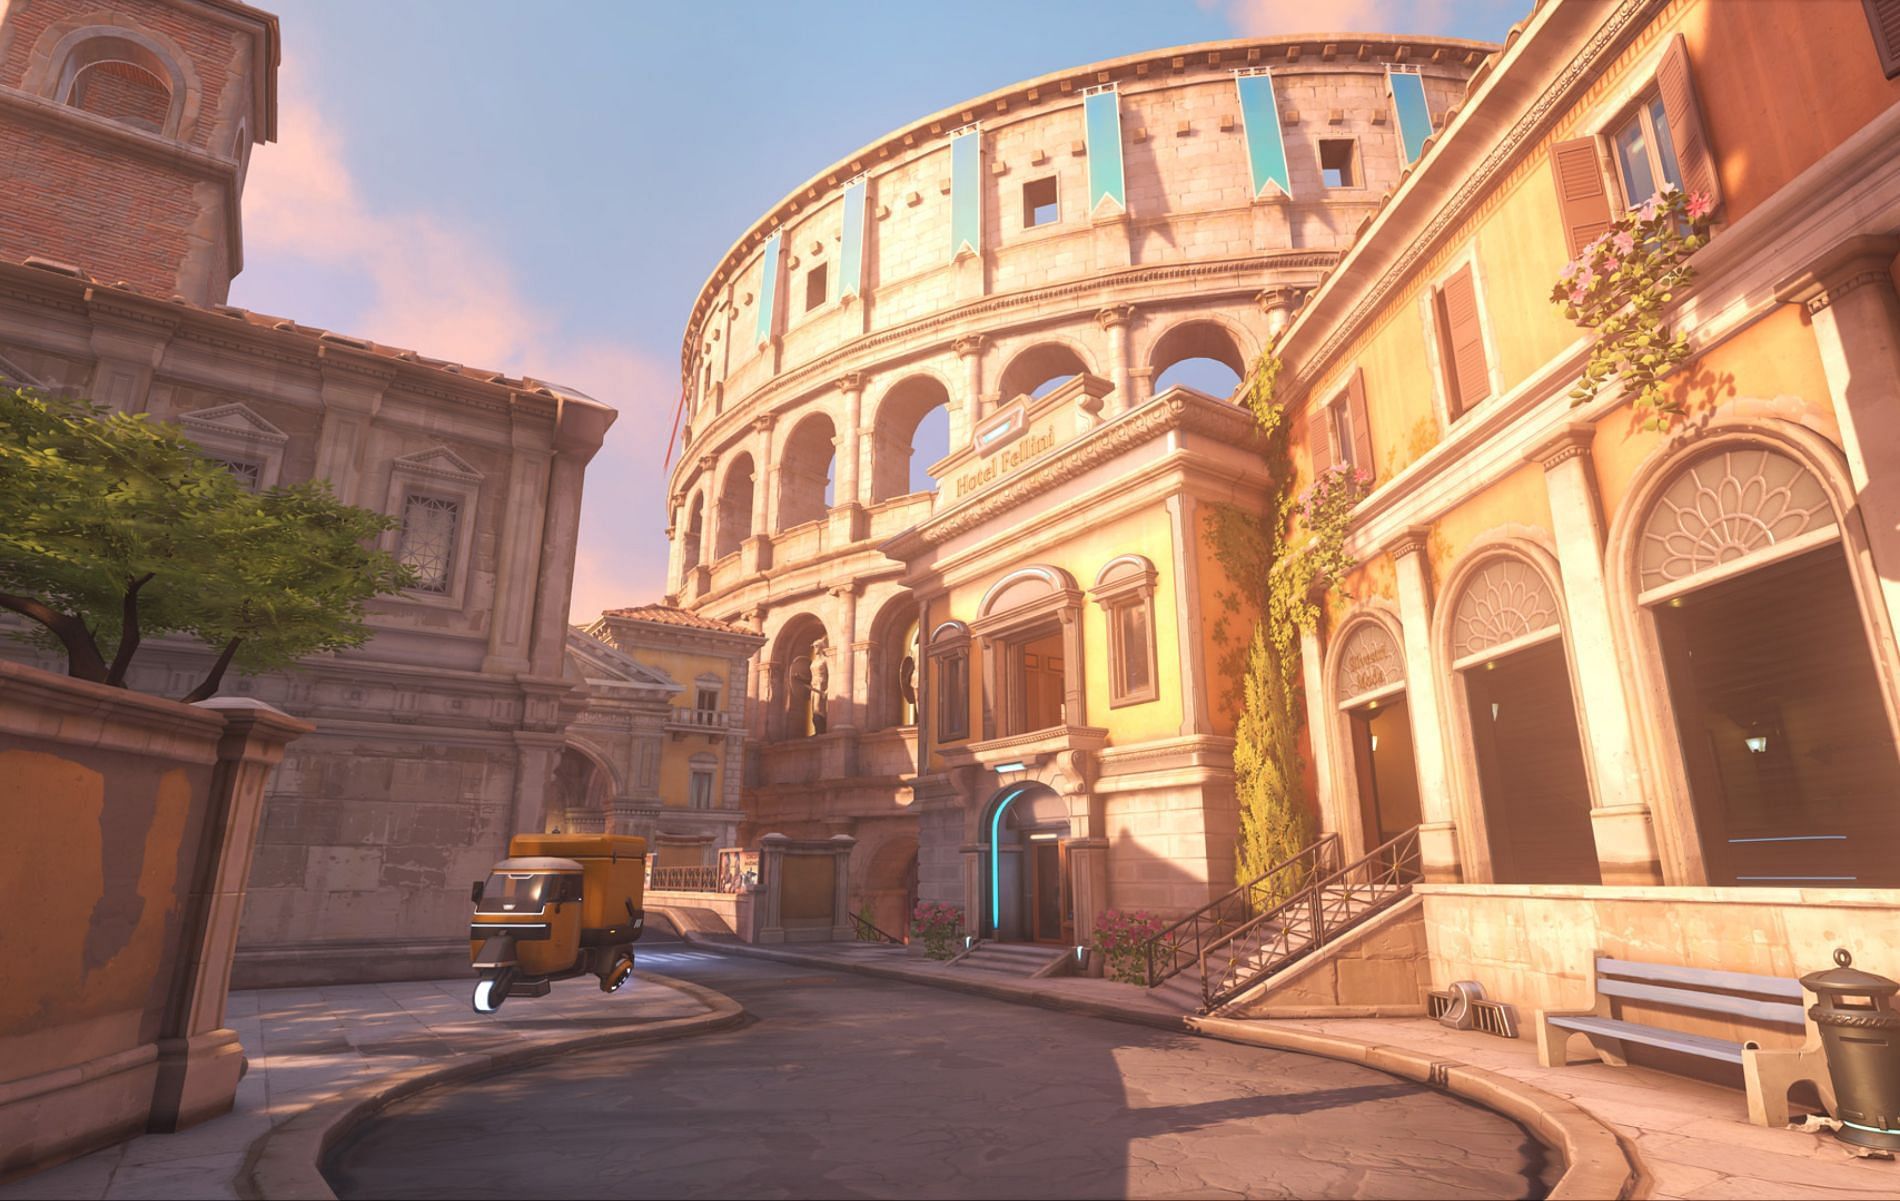 A map that resembles Rome, Colosseo has narrow alleys ideally suited for Tank players and flanking maneuvers alike (Image via Blizzard Entertainment)